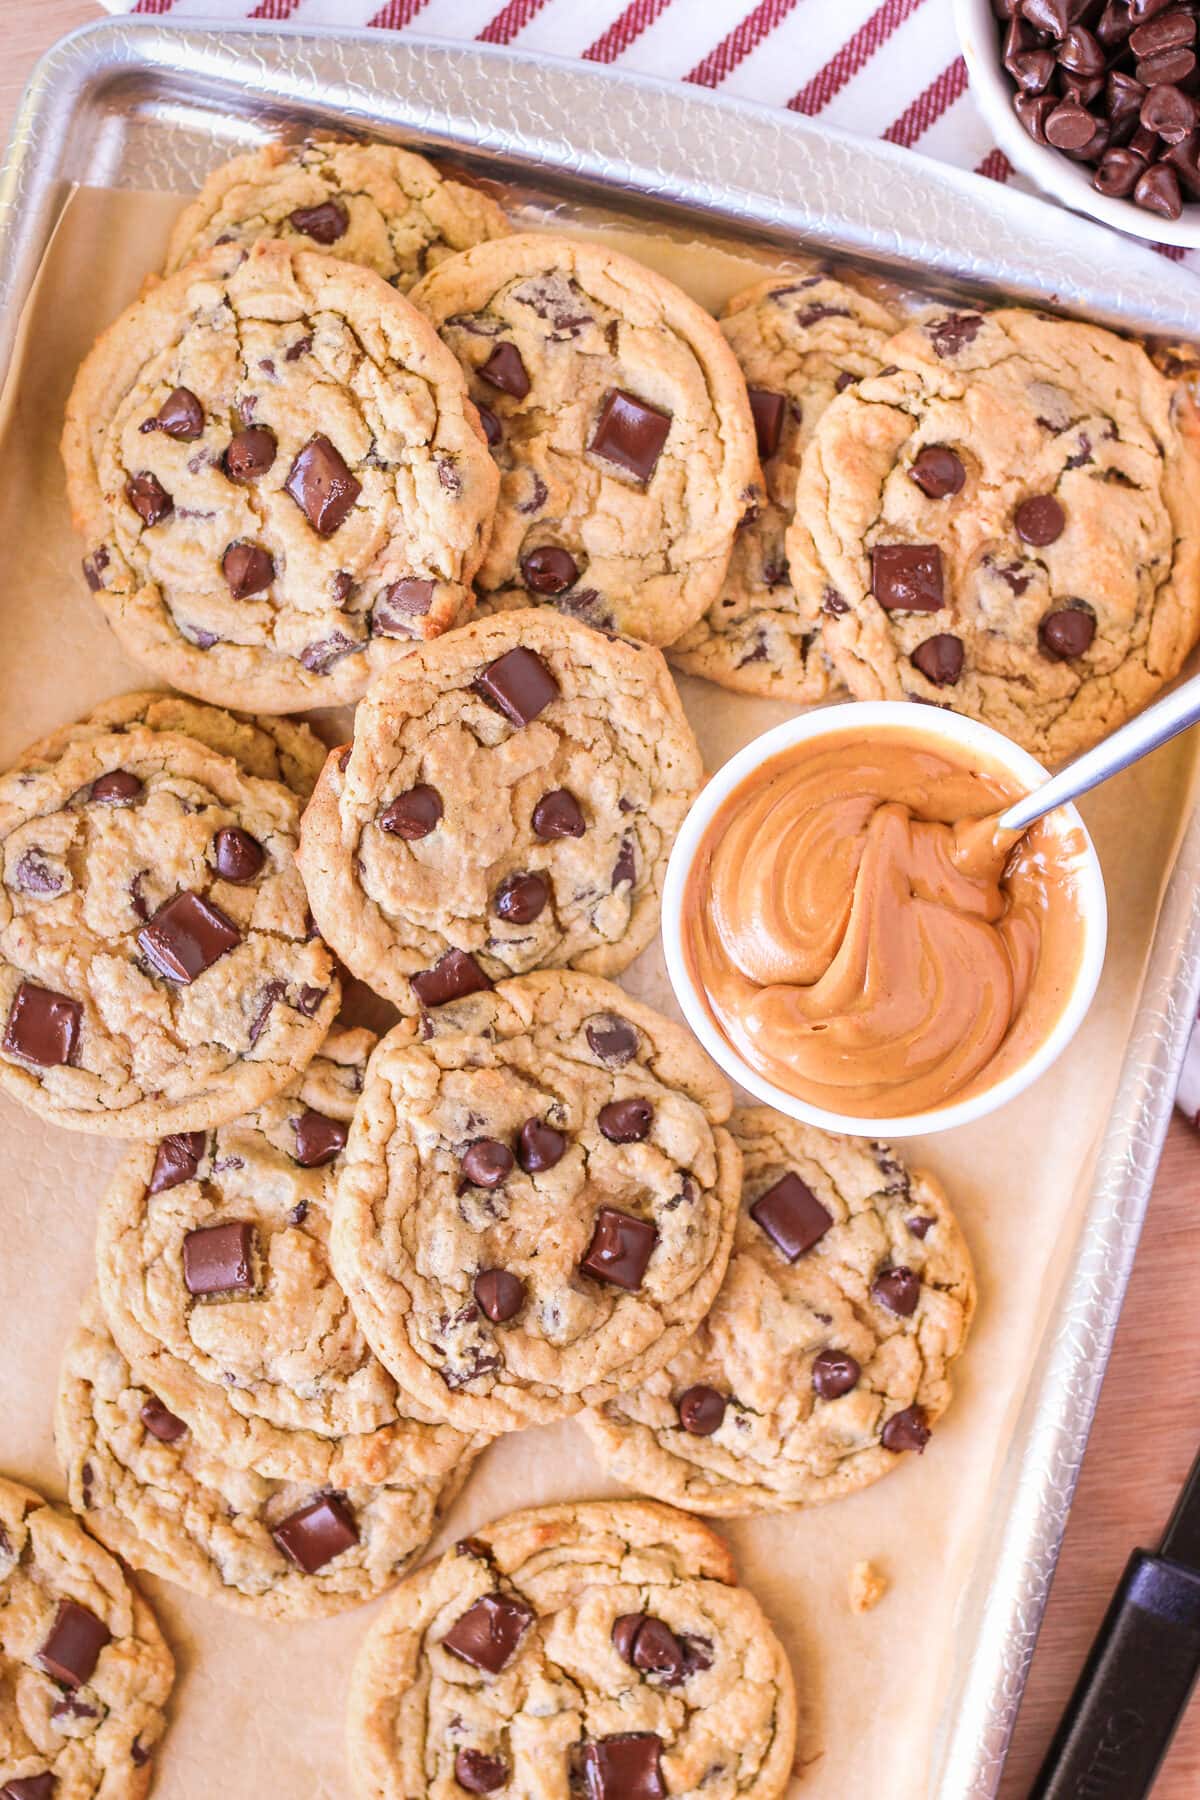 freshly baked peanut butter chocolate chip cookies on a baking sheet with a bowl full of peanut butter next to it with a spoon inside.